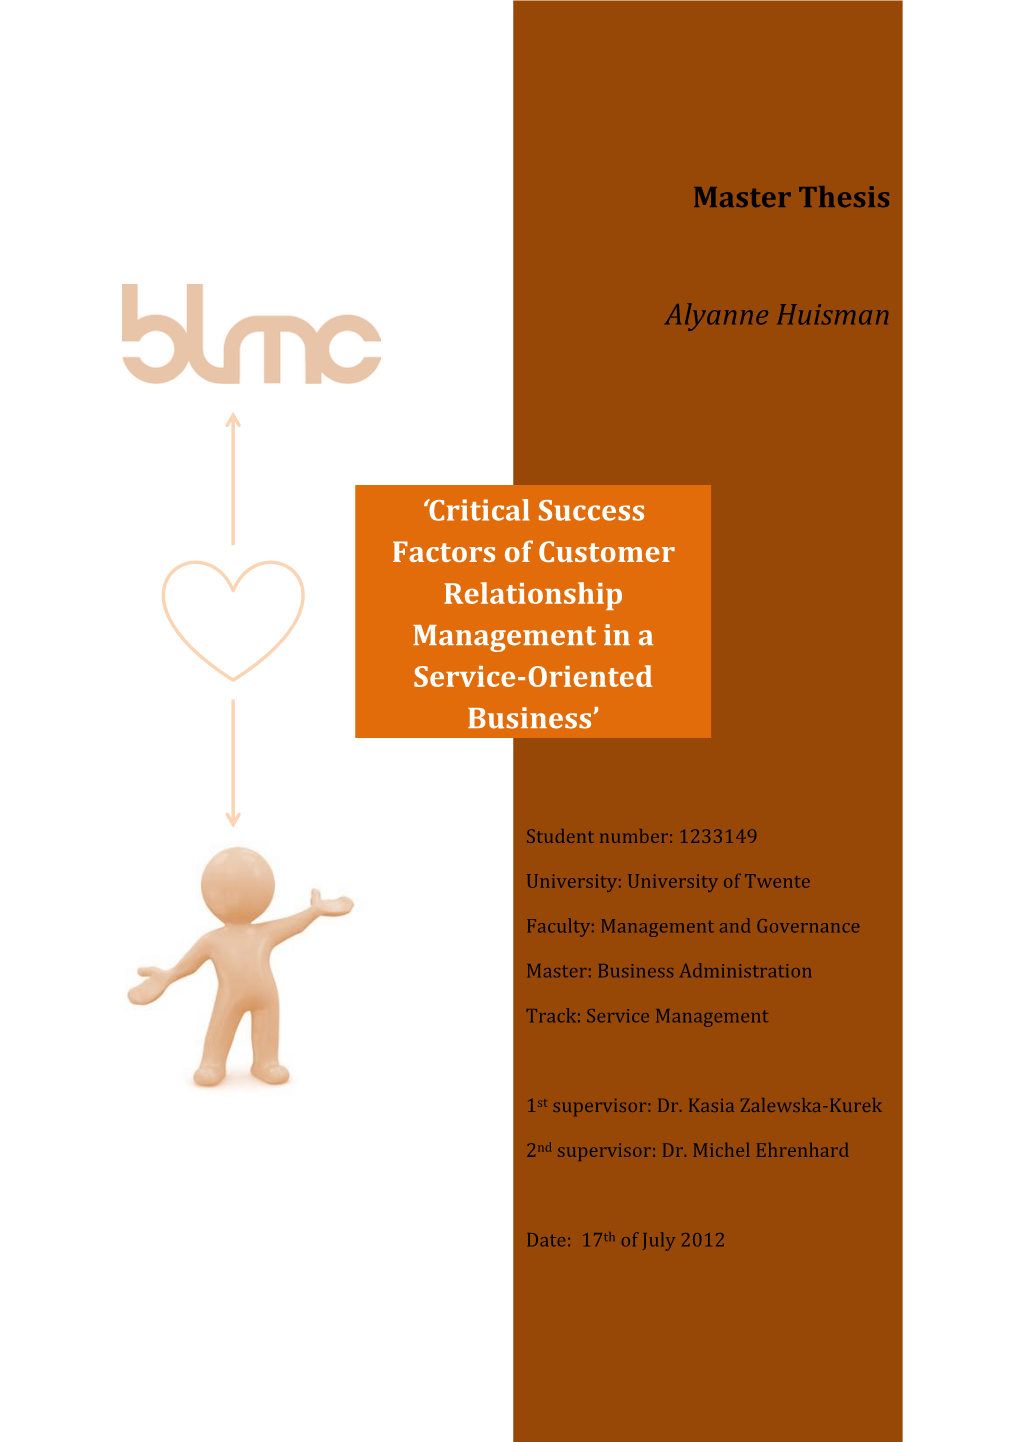 Critical Success Factors of Customer Relationship Management in A